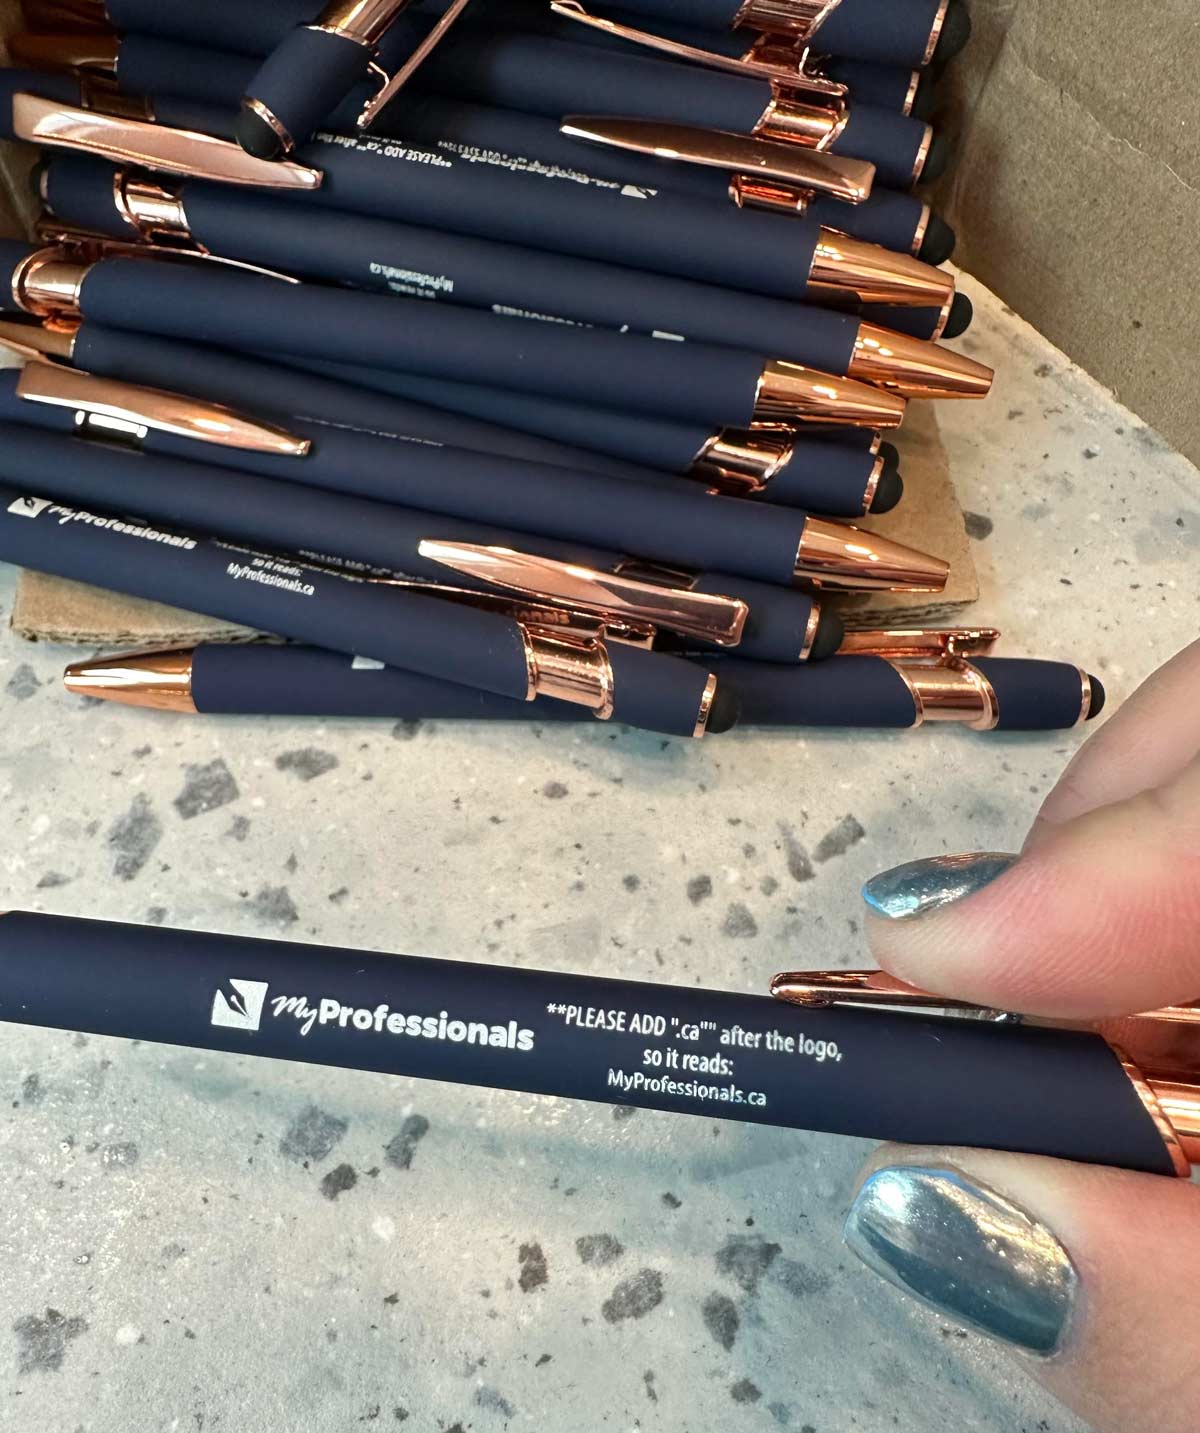 This company absolutely butchered our pen order, instead of following the instructions in our conversation, they just printed the instructions right on the pens..